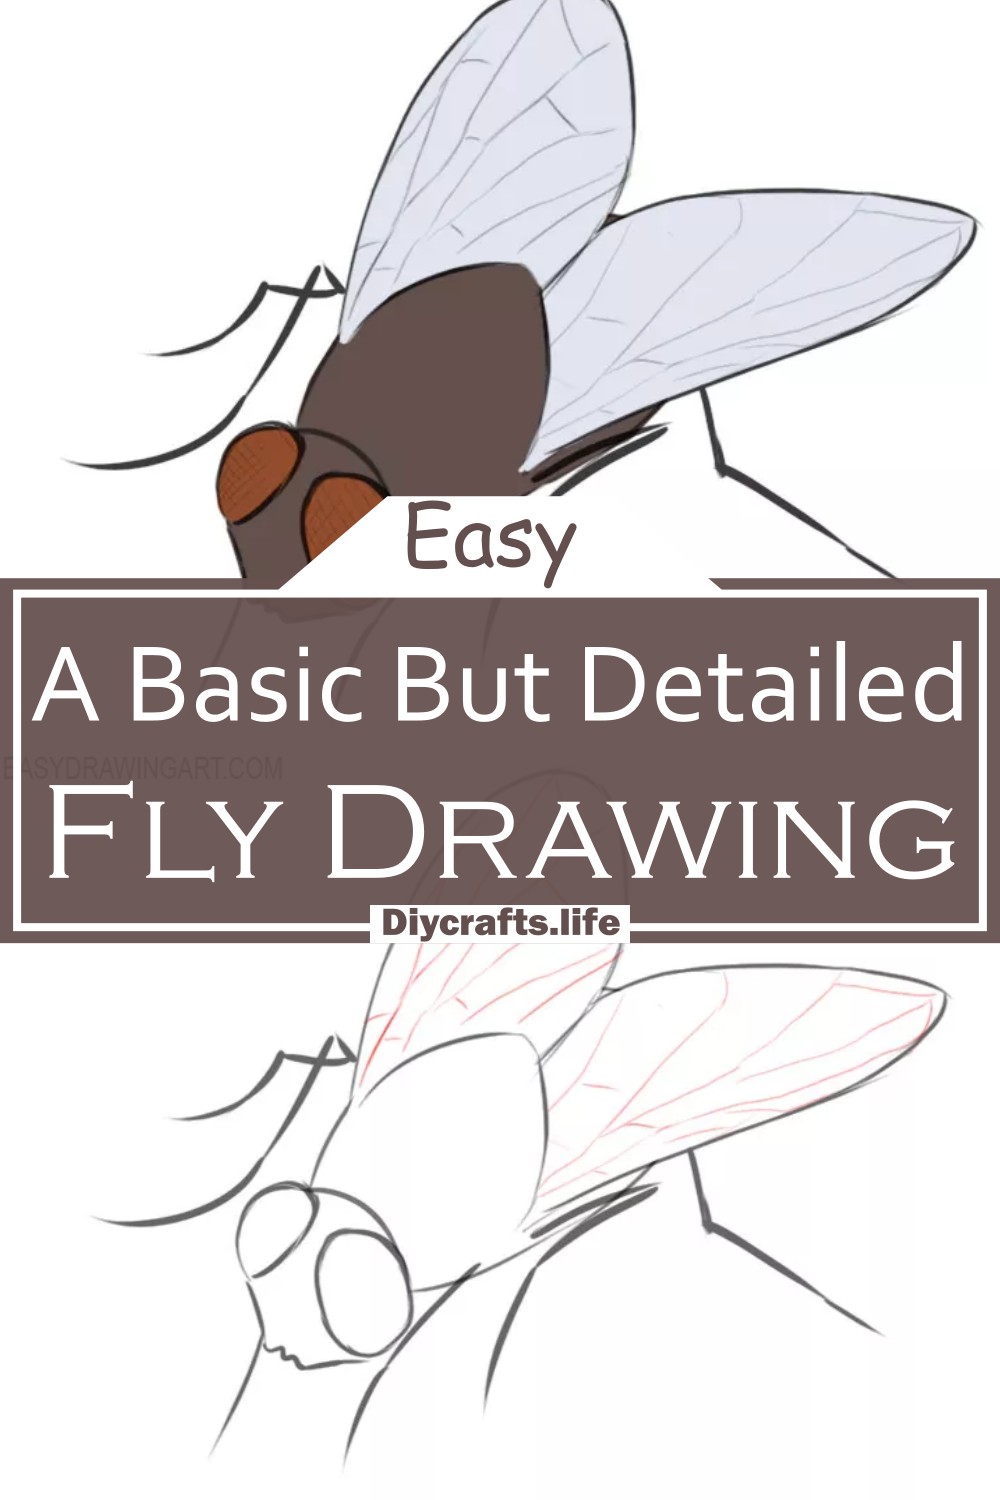 A Basic But Detailed Fly Drawing